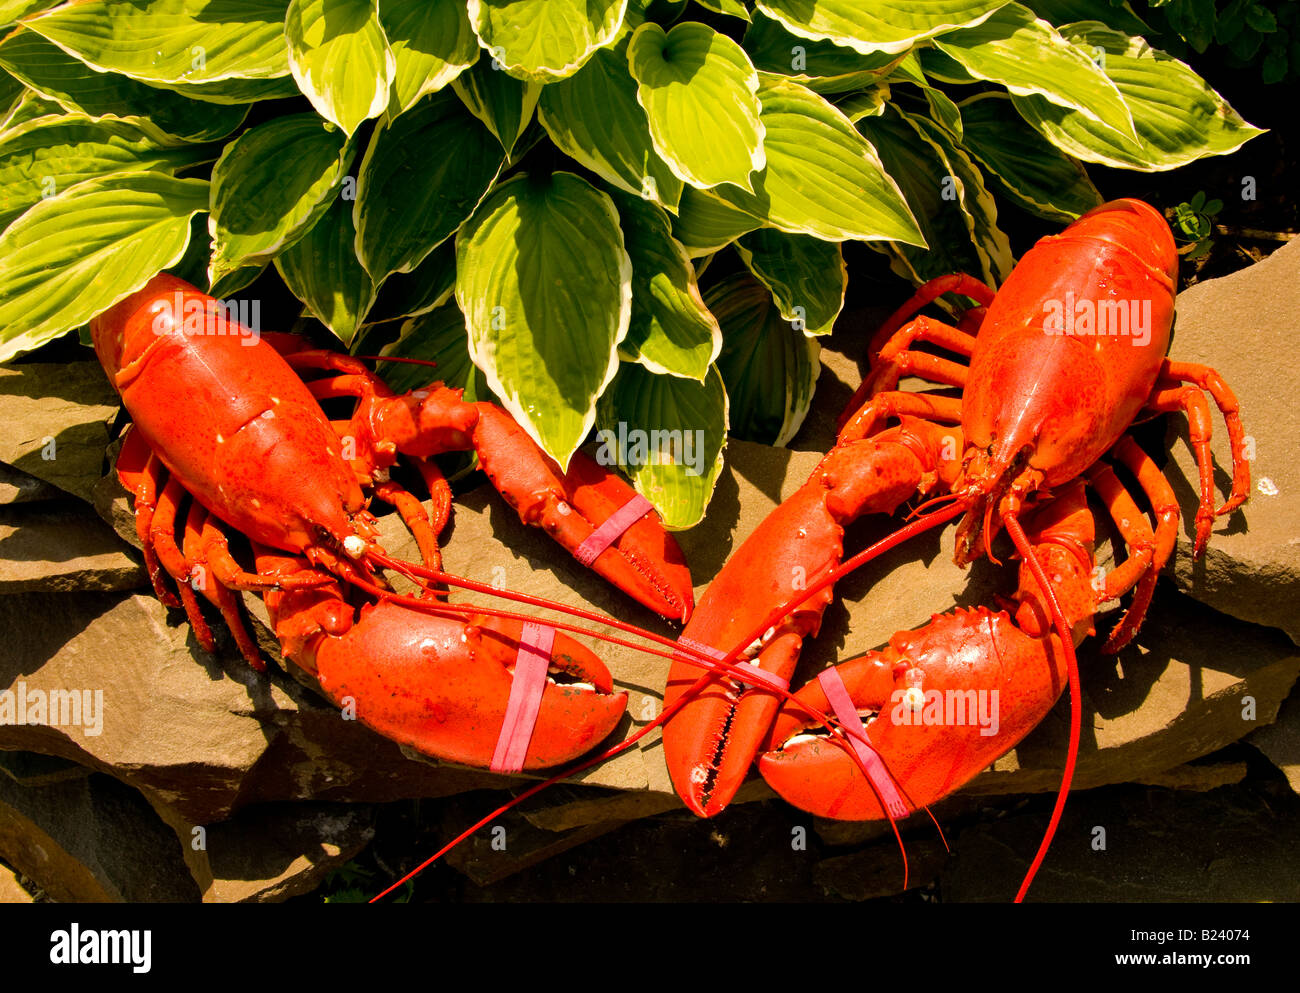 Canada New Brunswick Bay of Fundy Lobsters on display Alma Lobster Shop